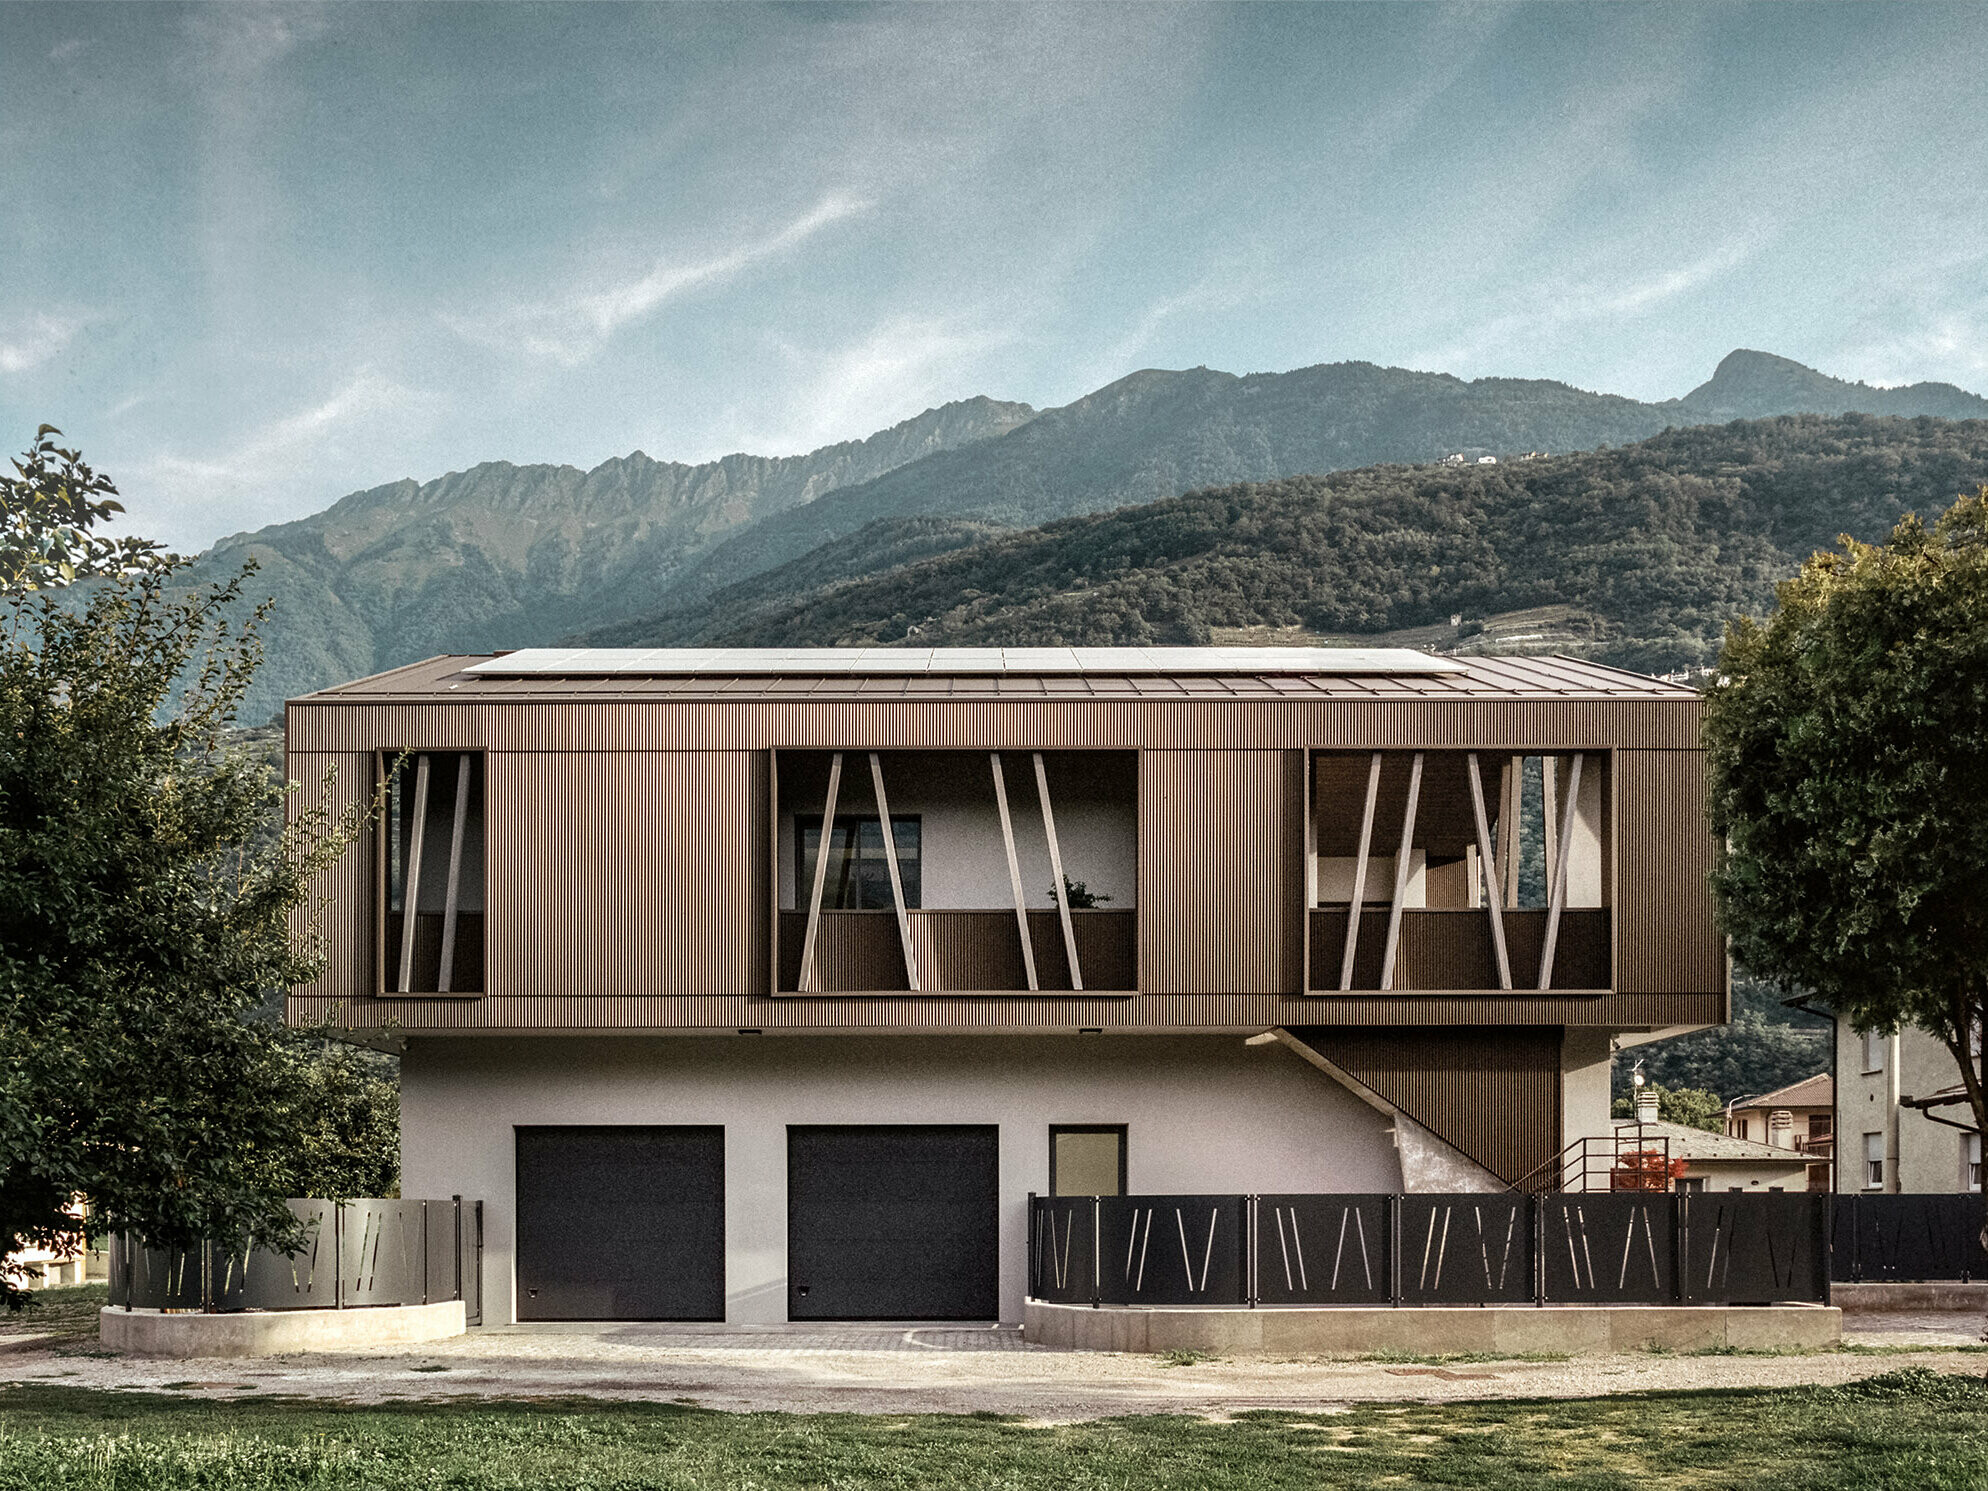 The house after the reconstruction work: The plaster façade has a fresh look, the upper storey, which is clad with the serrated profile and Prefalz, received an open and contemporary appearance with a new design language and the wooded mountain landscape stretches out in the background.